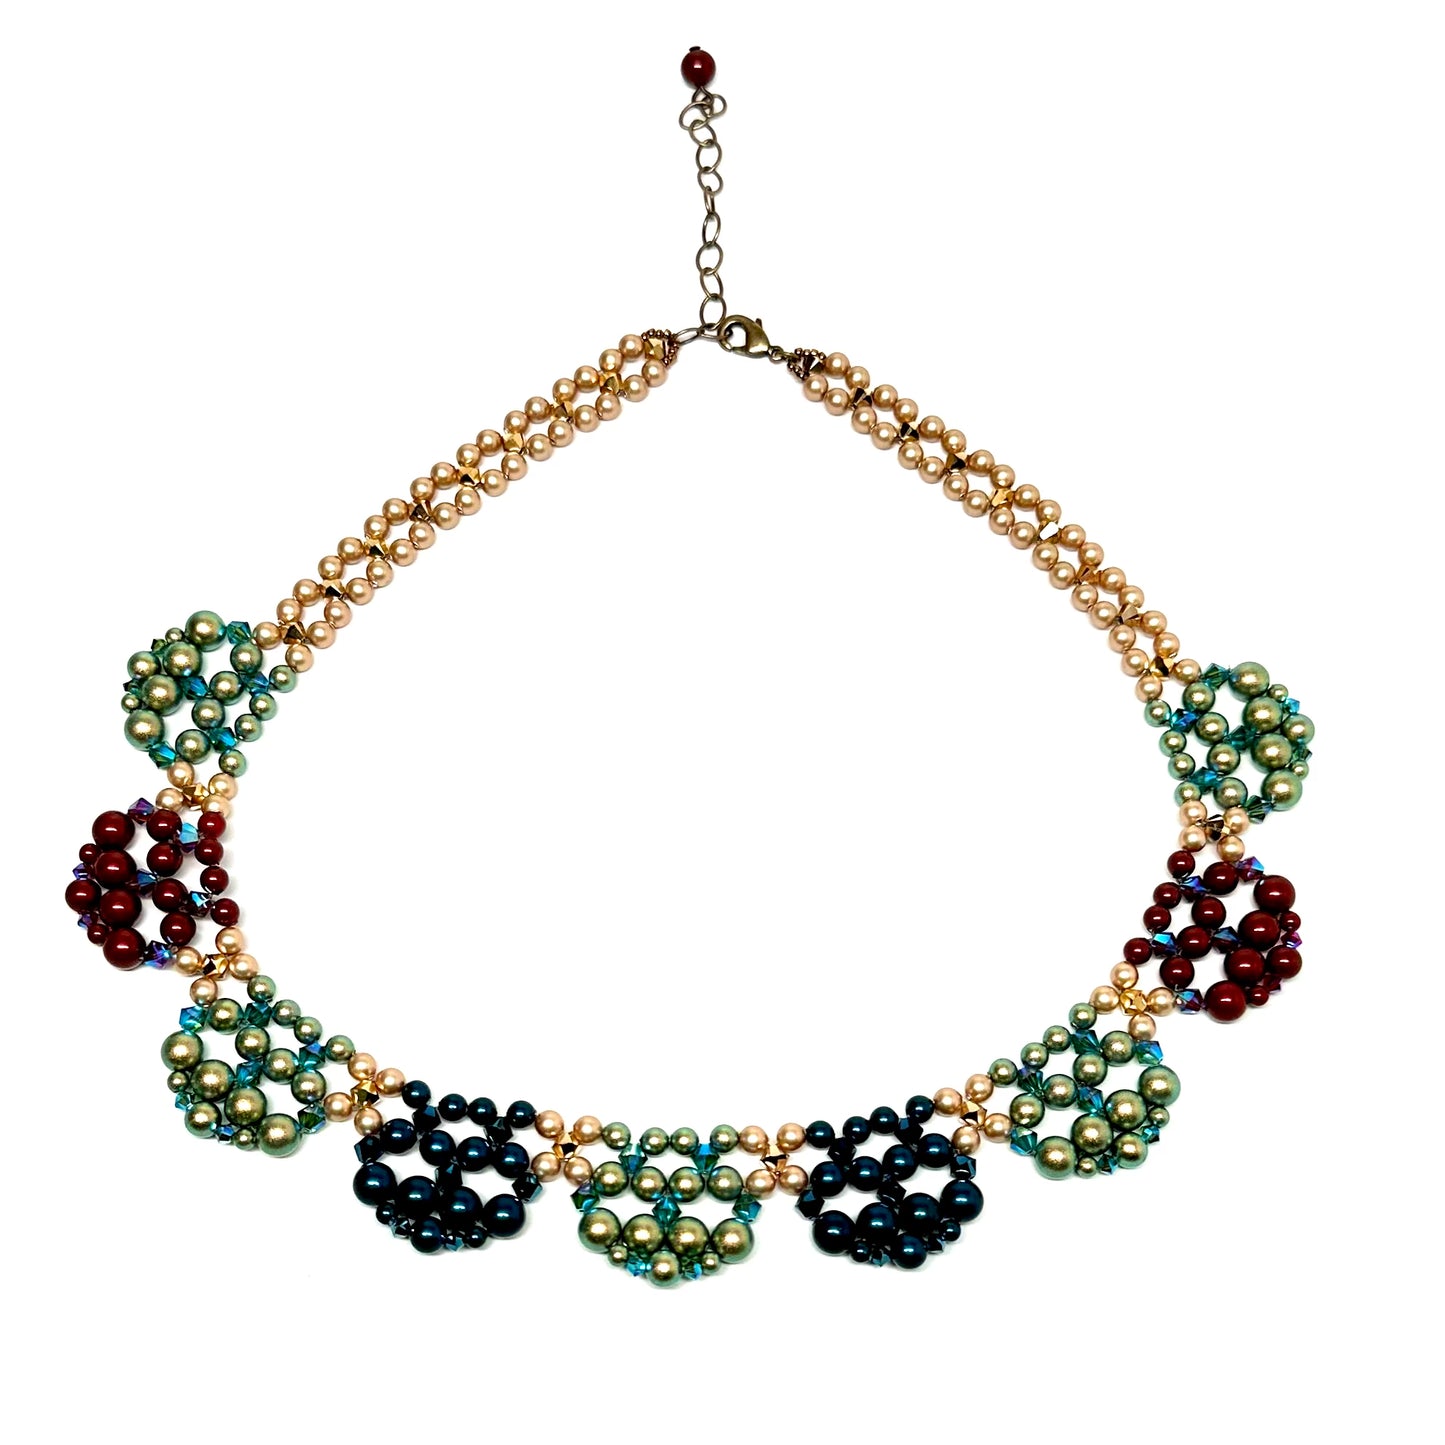 Art Deco Inspired Necklace | Statement in Jewel Colored Pearl & Crystal